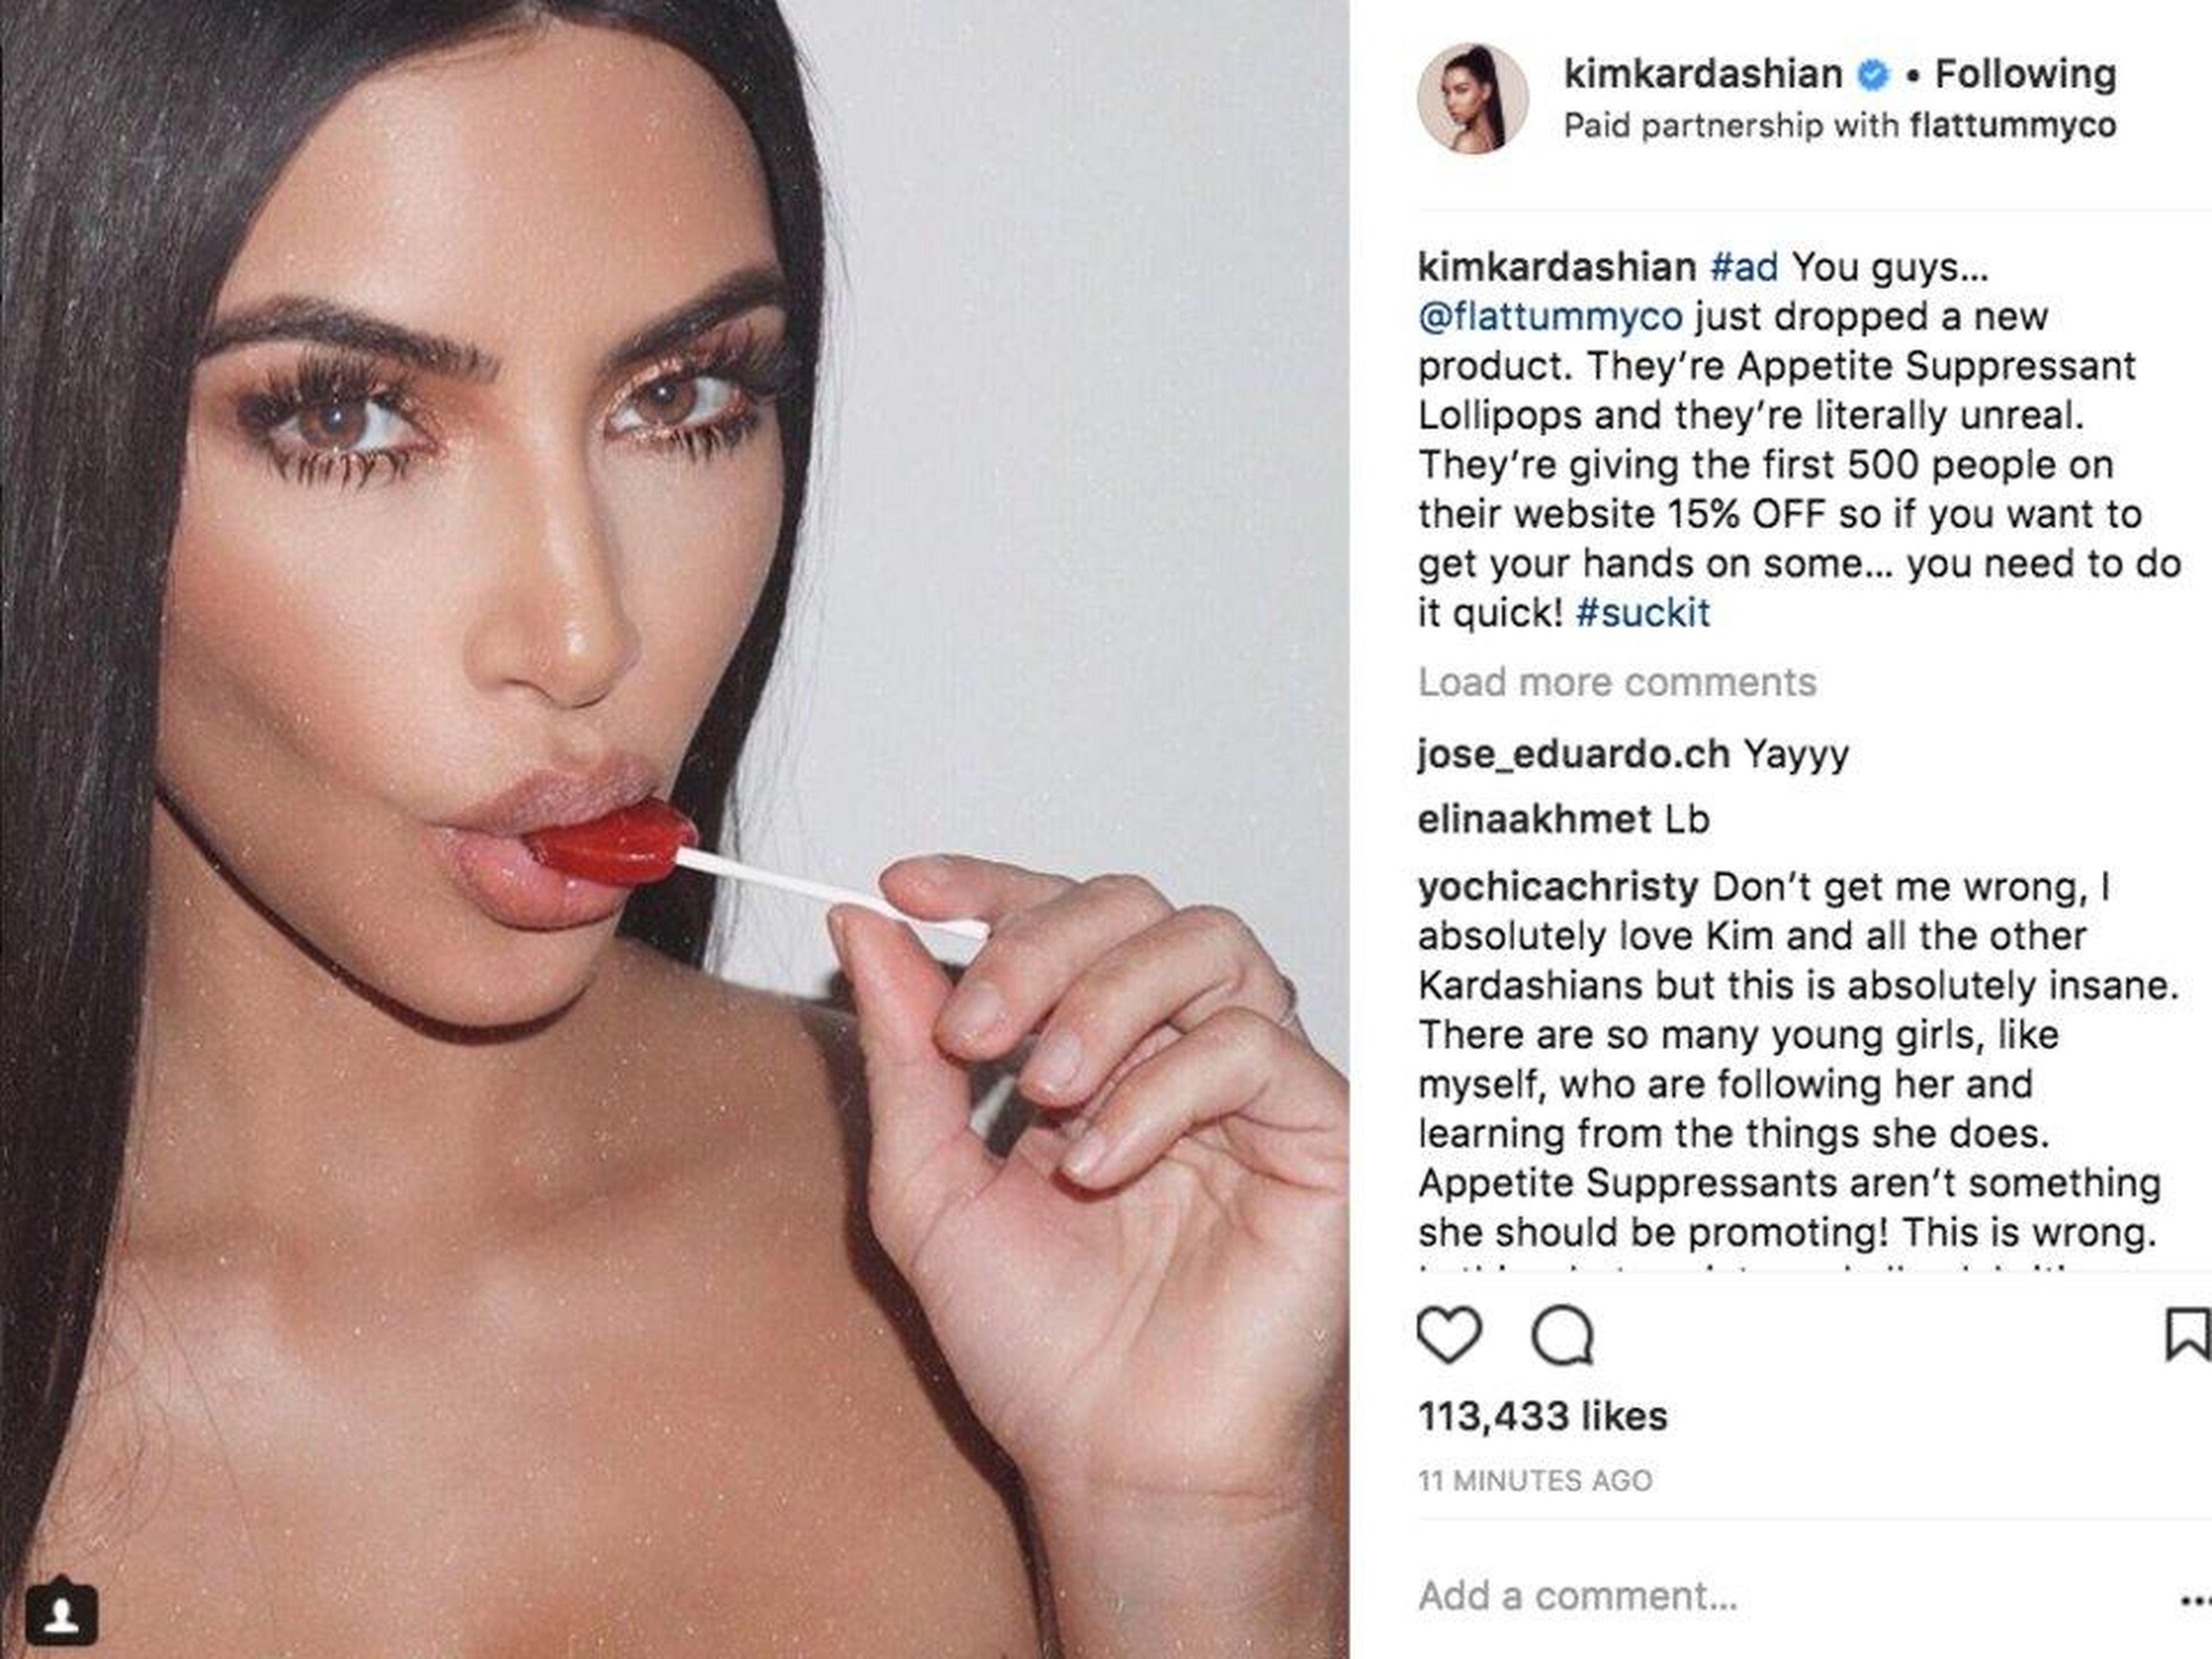 Instagram will restrict posts and ads about weight loss and cosmetic surgery to try and protect teen users